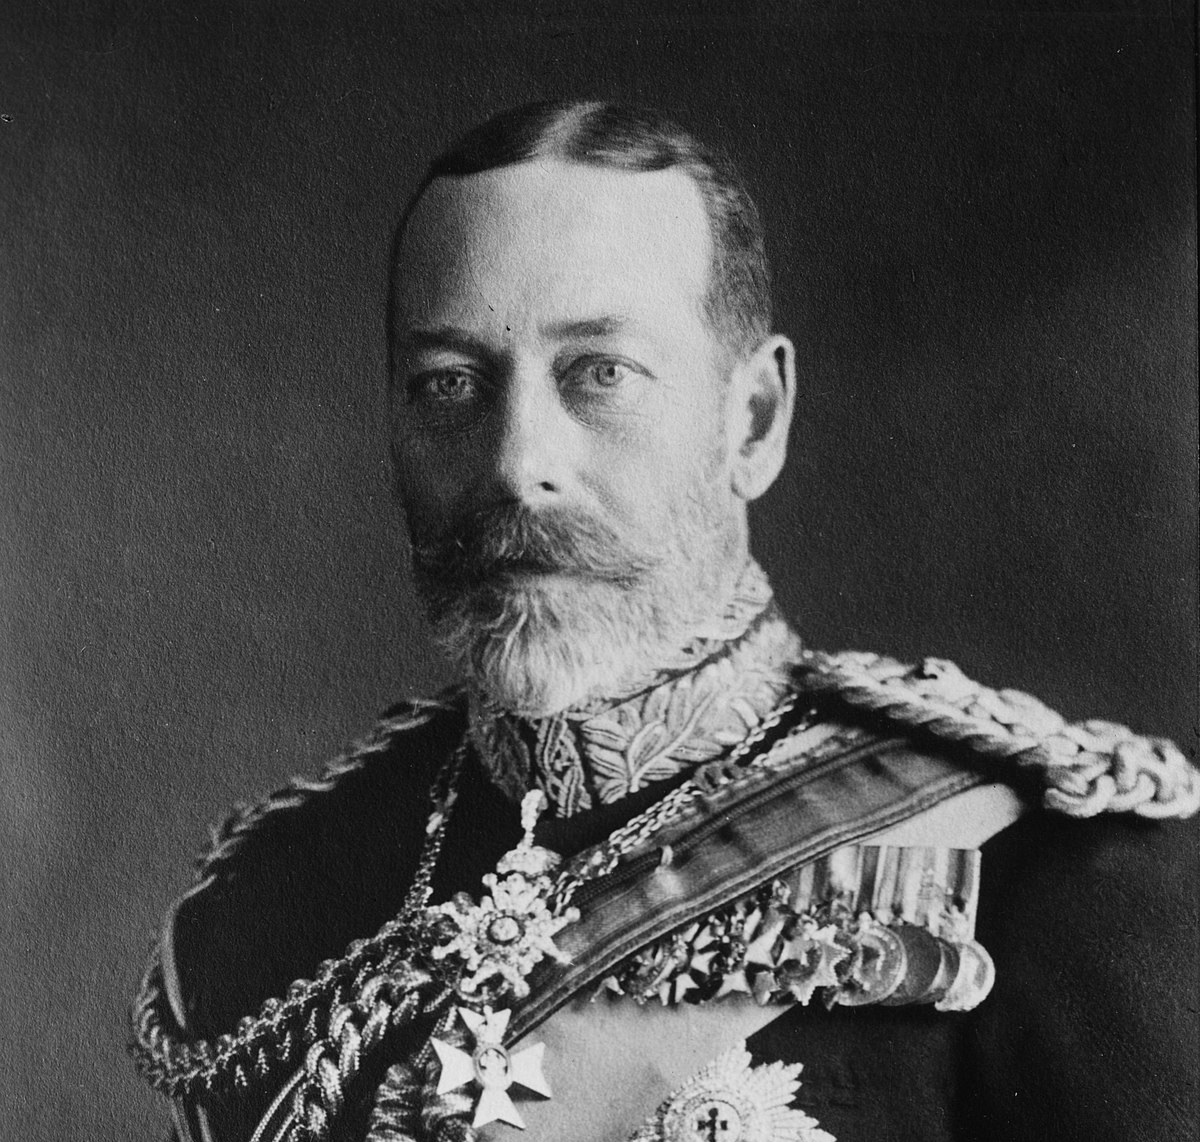 King George V, apparently, was also a hunter. Img from Wikipedia.